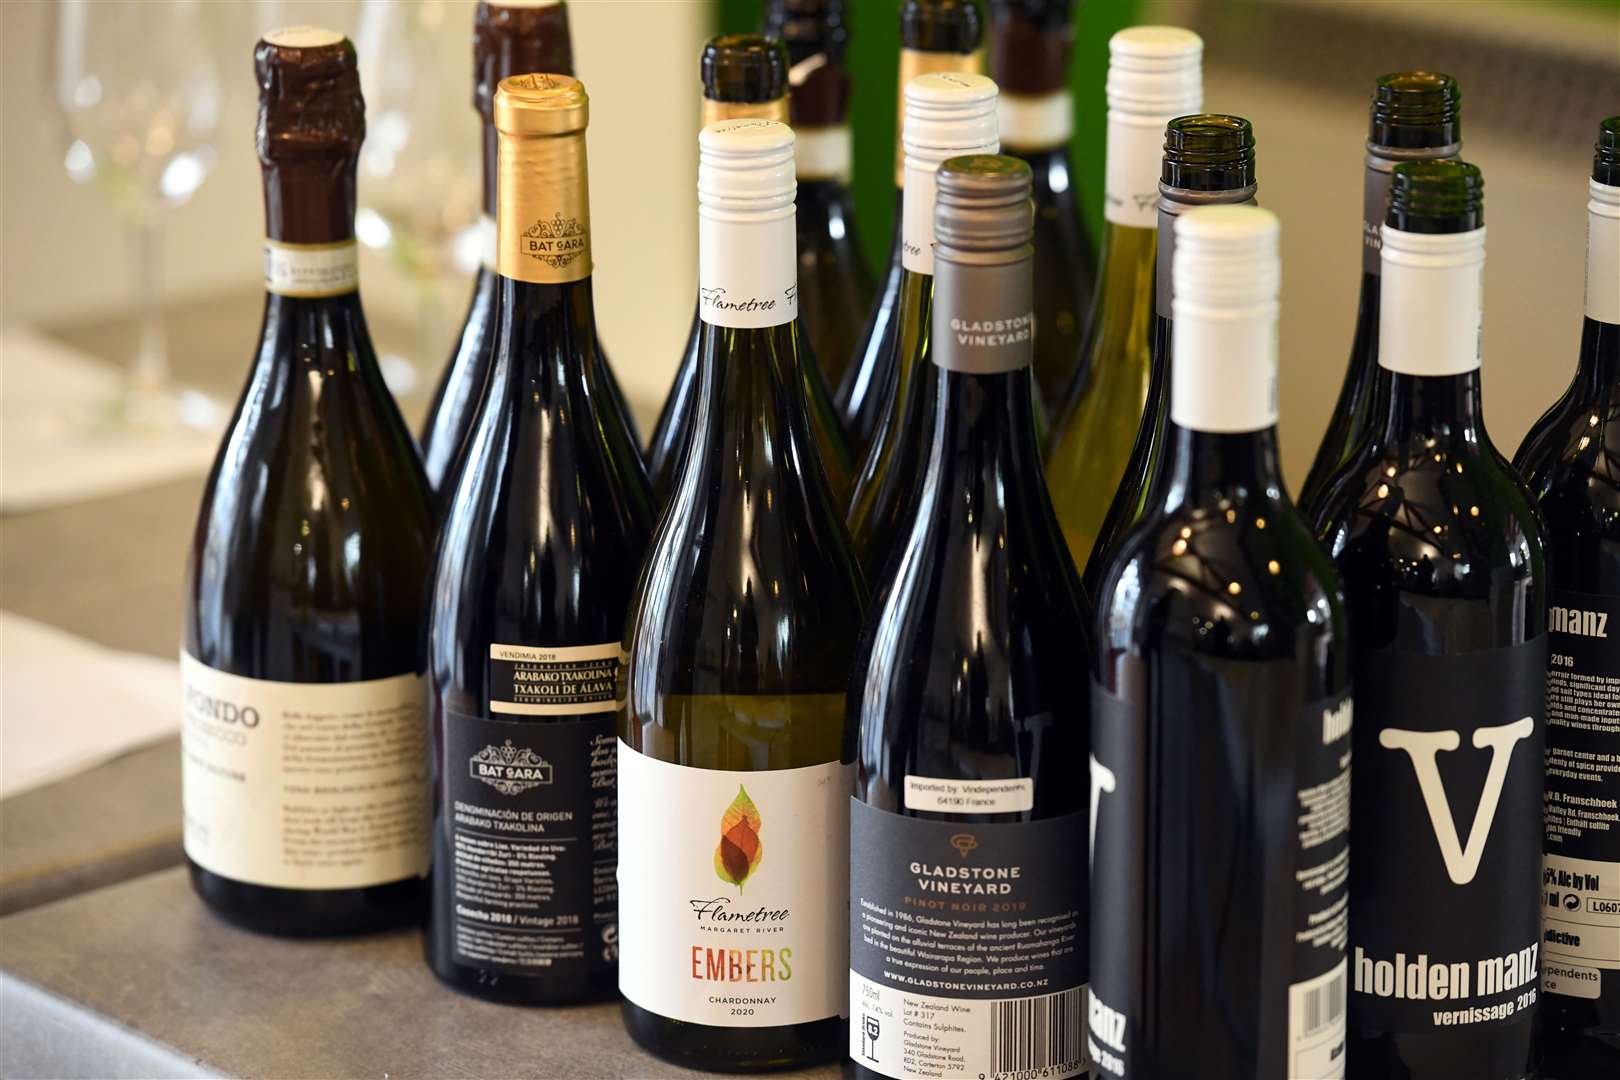 Cheese and wine night at the Inverness Botanic Garden Centre to raise money for Macmillan Cancer Support: Selection of wines. Picture: James Mackenzie.